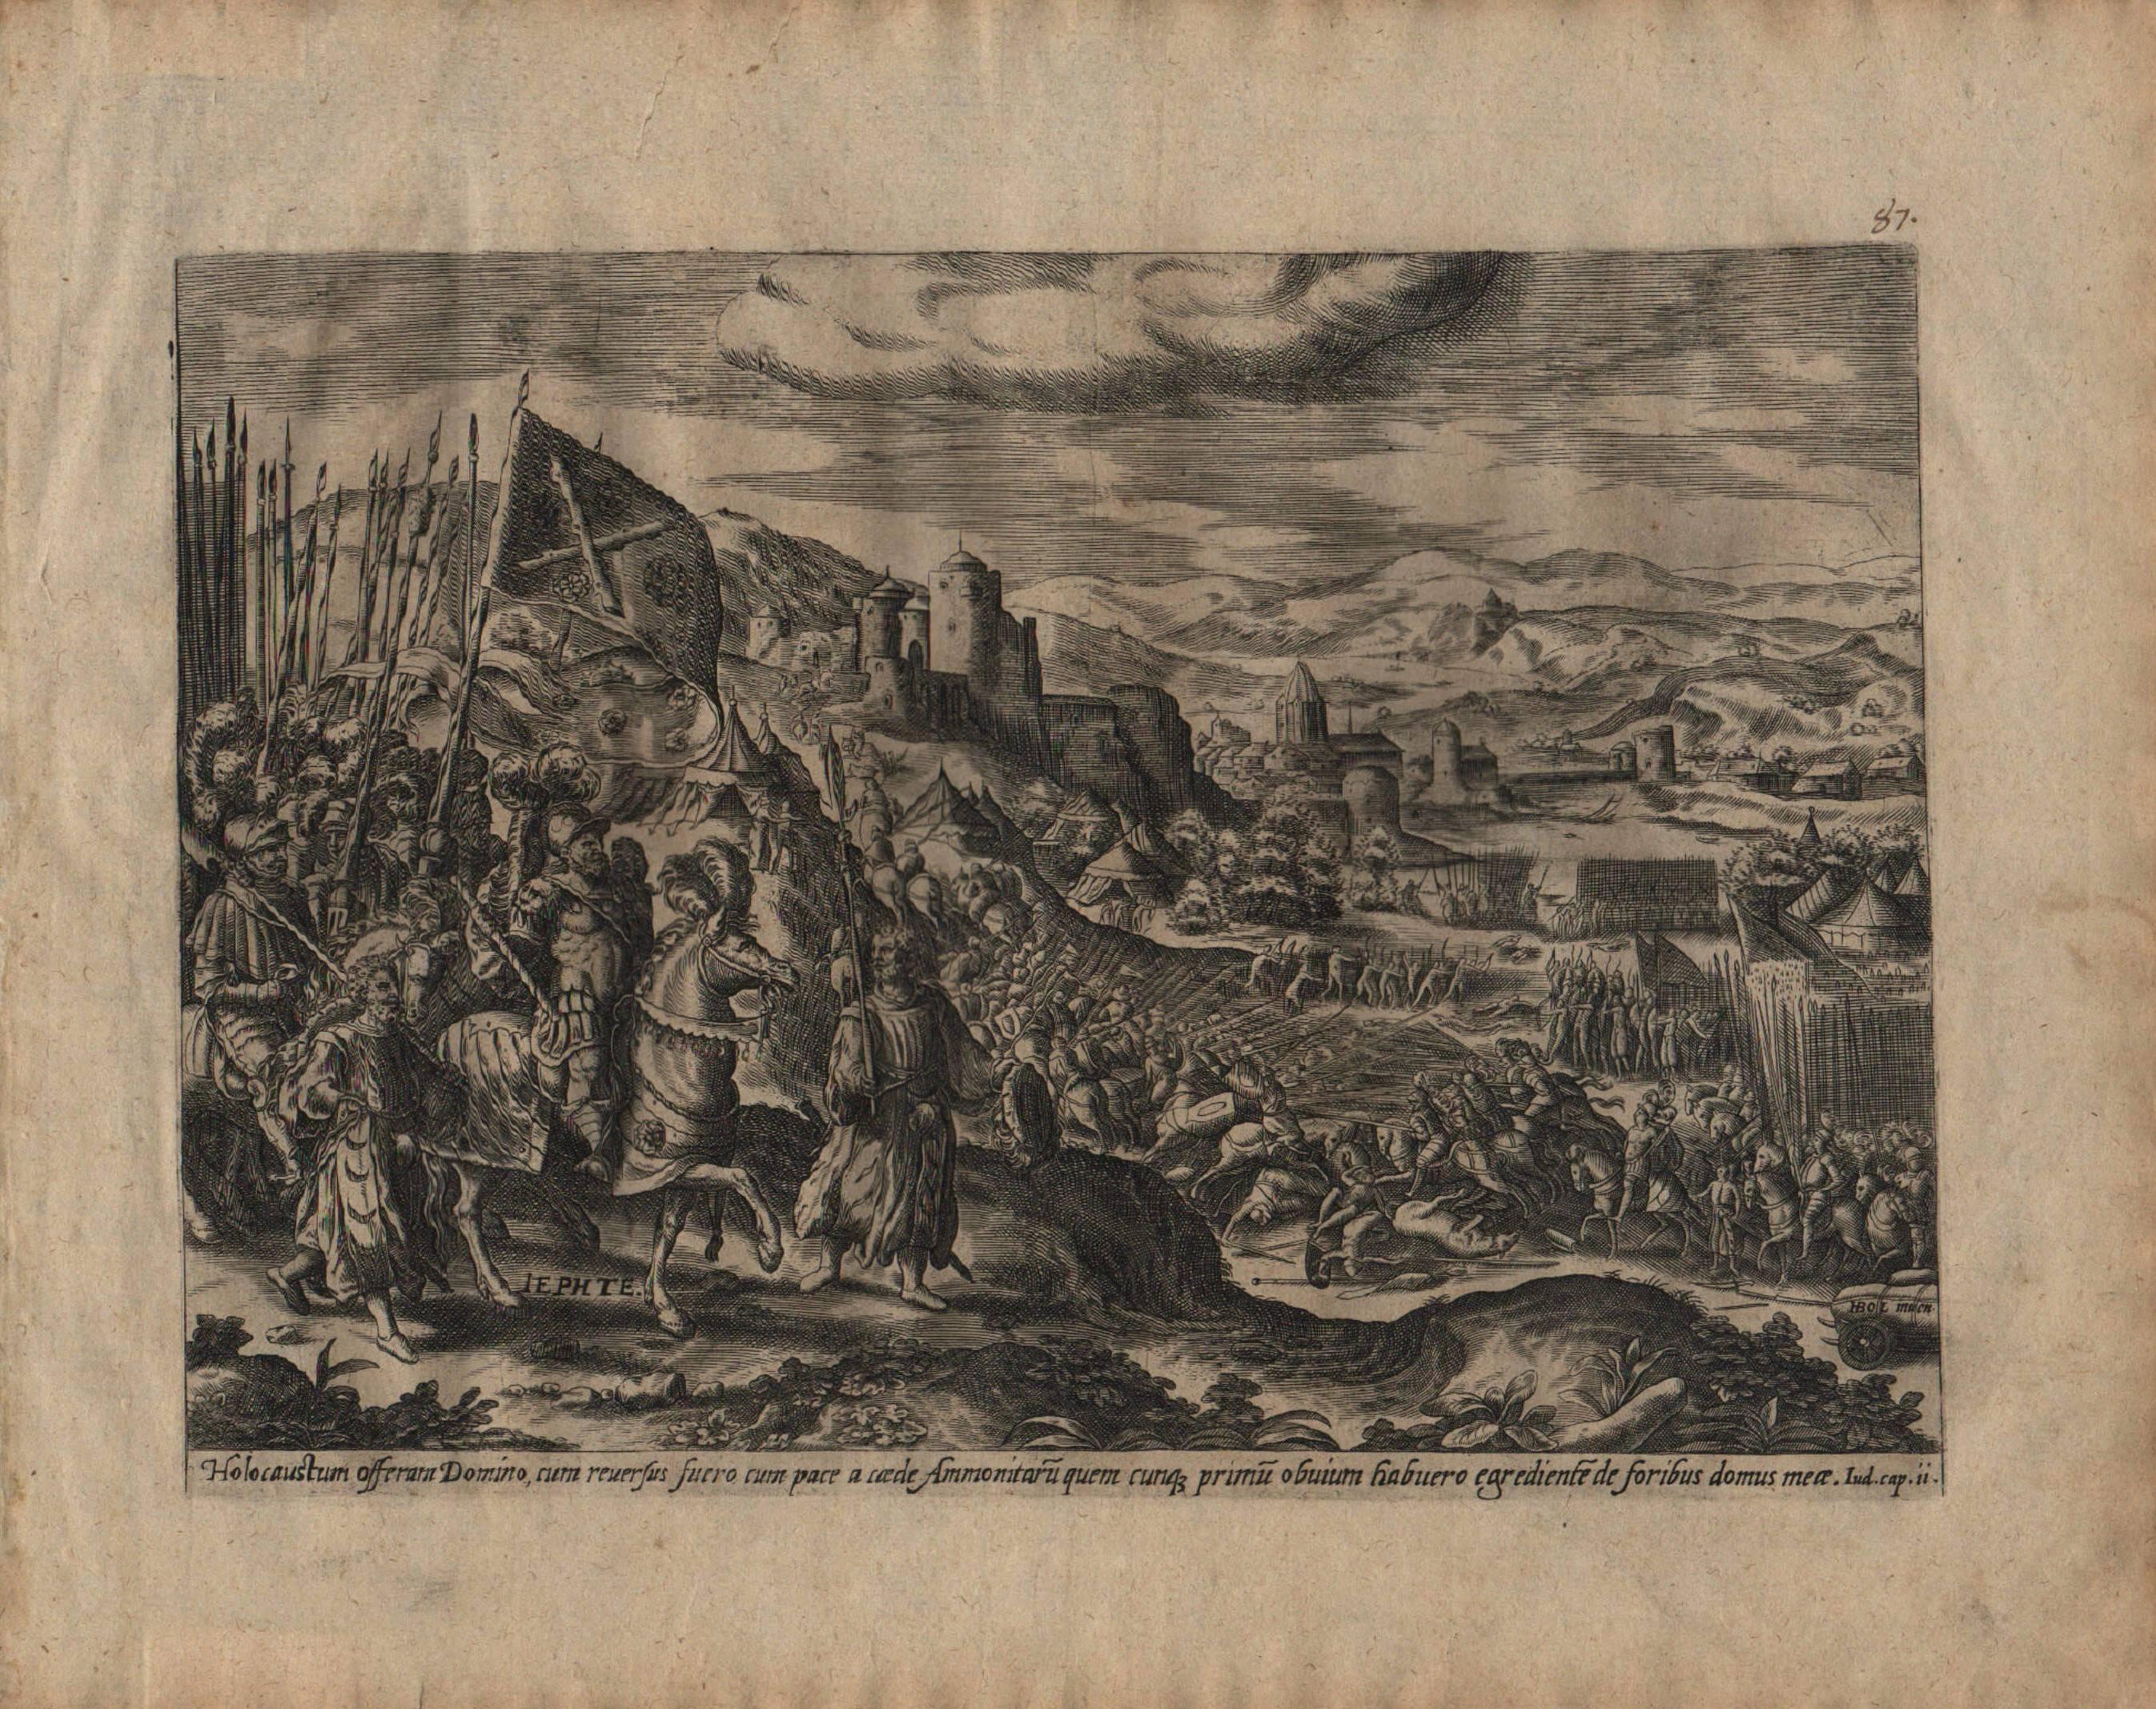 The Story of Jephthah - 1585 Set of 4 Plates - Old Master Engraving Landscape - Northern Renaissance Print by Hans Bol